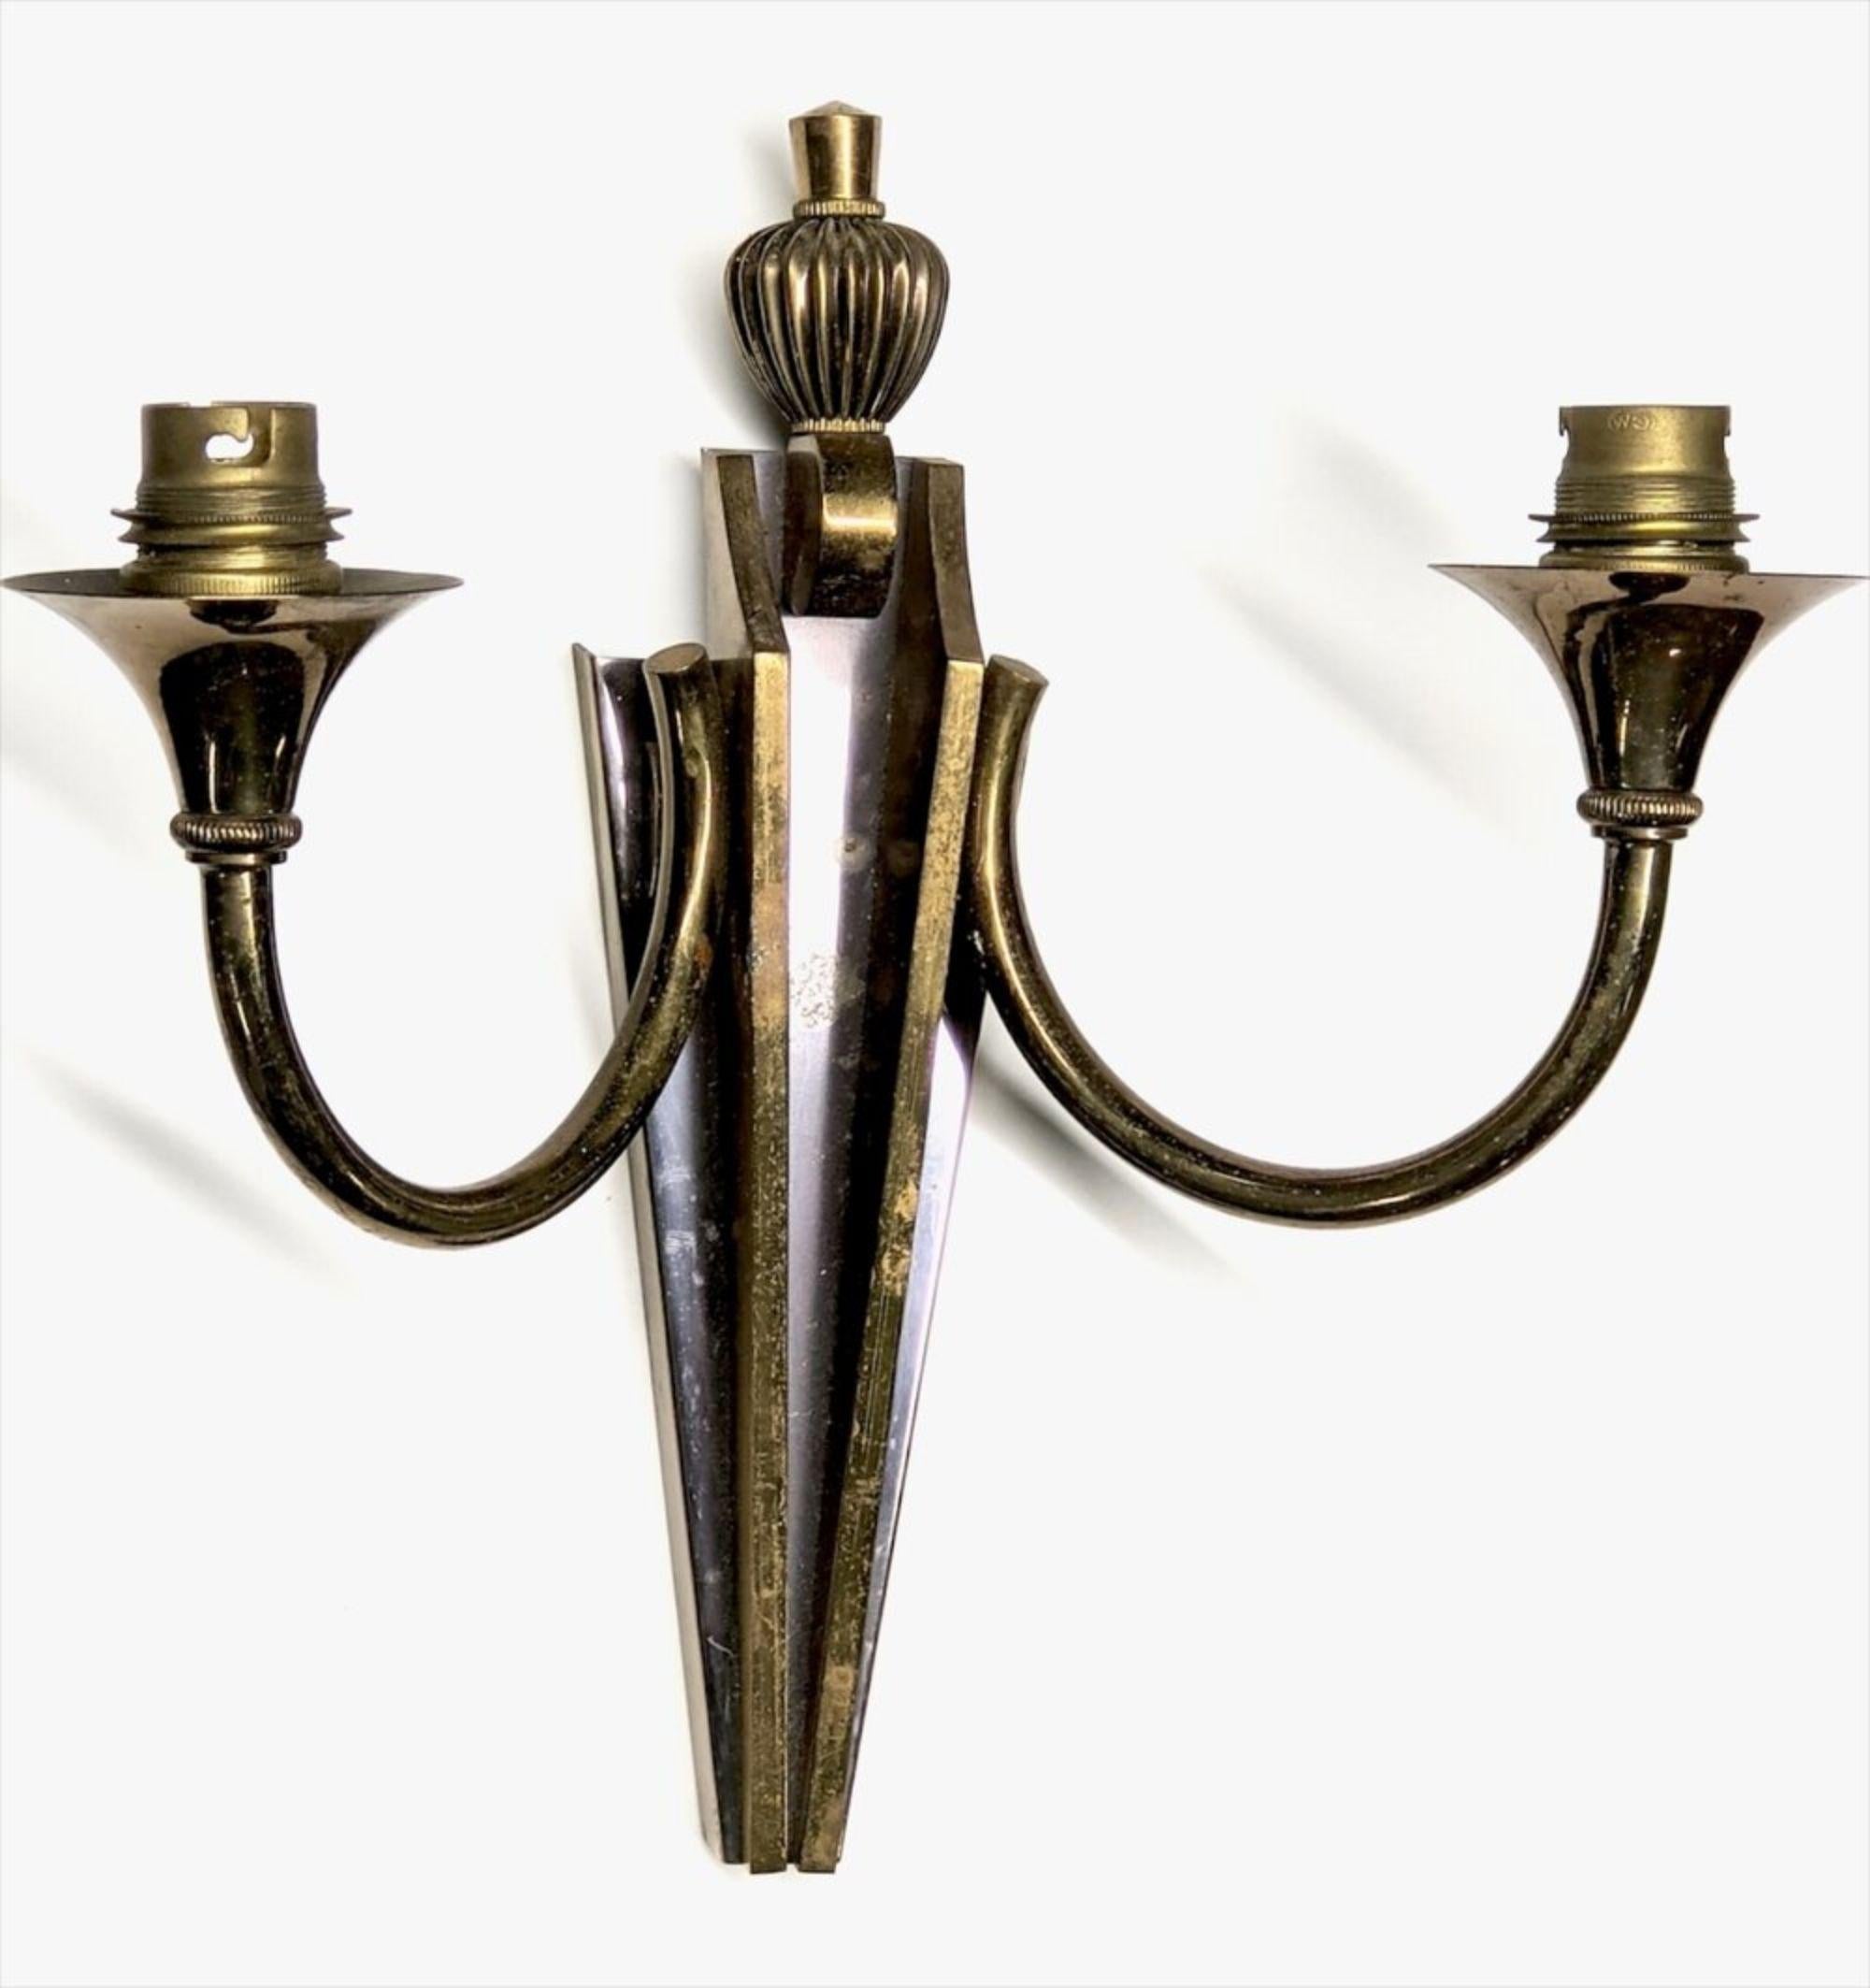 French 1940s Art Deco three two-branch sconces by Gilbert Poillerat. Available singly or pair or group. Bronze and patinated bronze. Measures: 12.5” wide x 4” deep x 10” high.